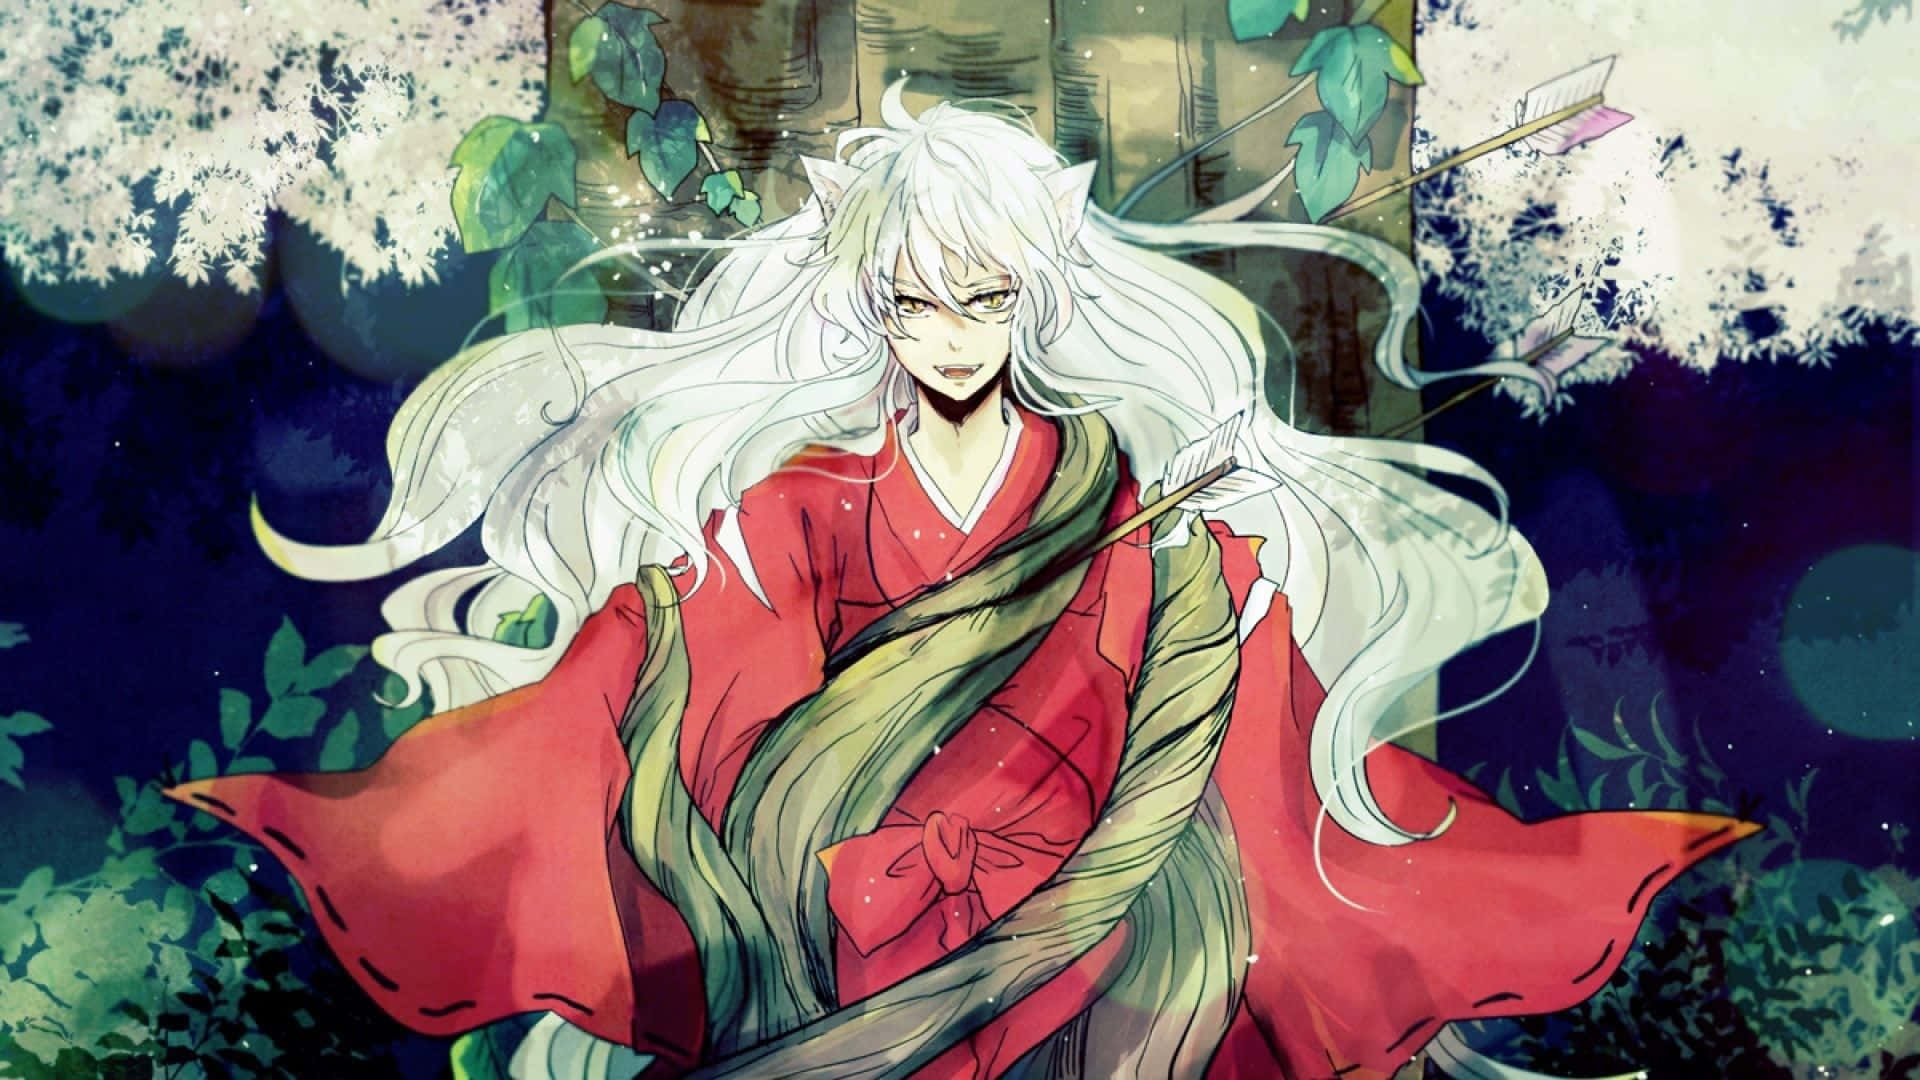 Based on the classic anime series, "Inuyasha" - now available in 4K Wallpaper